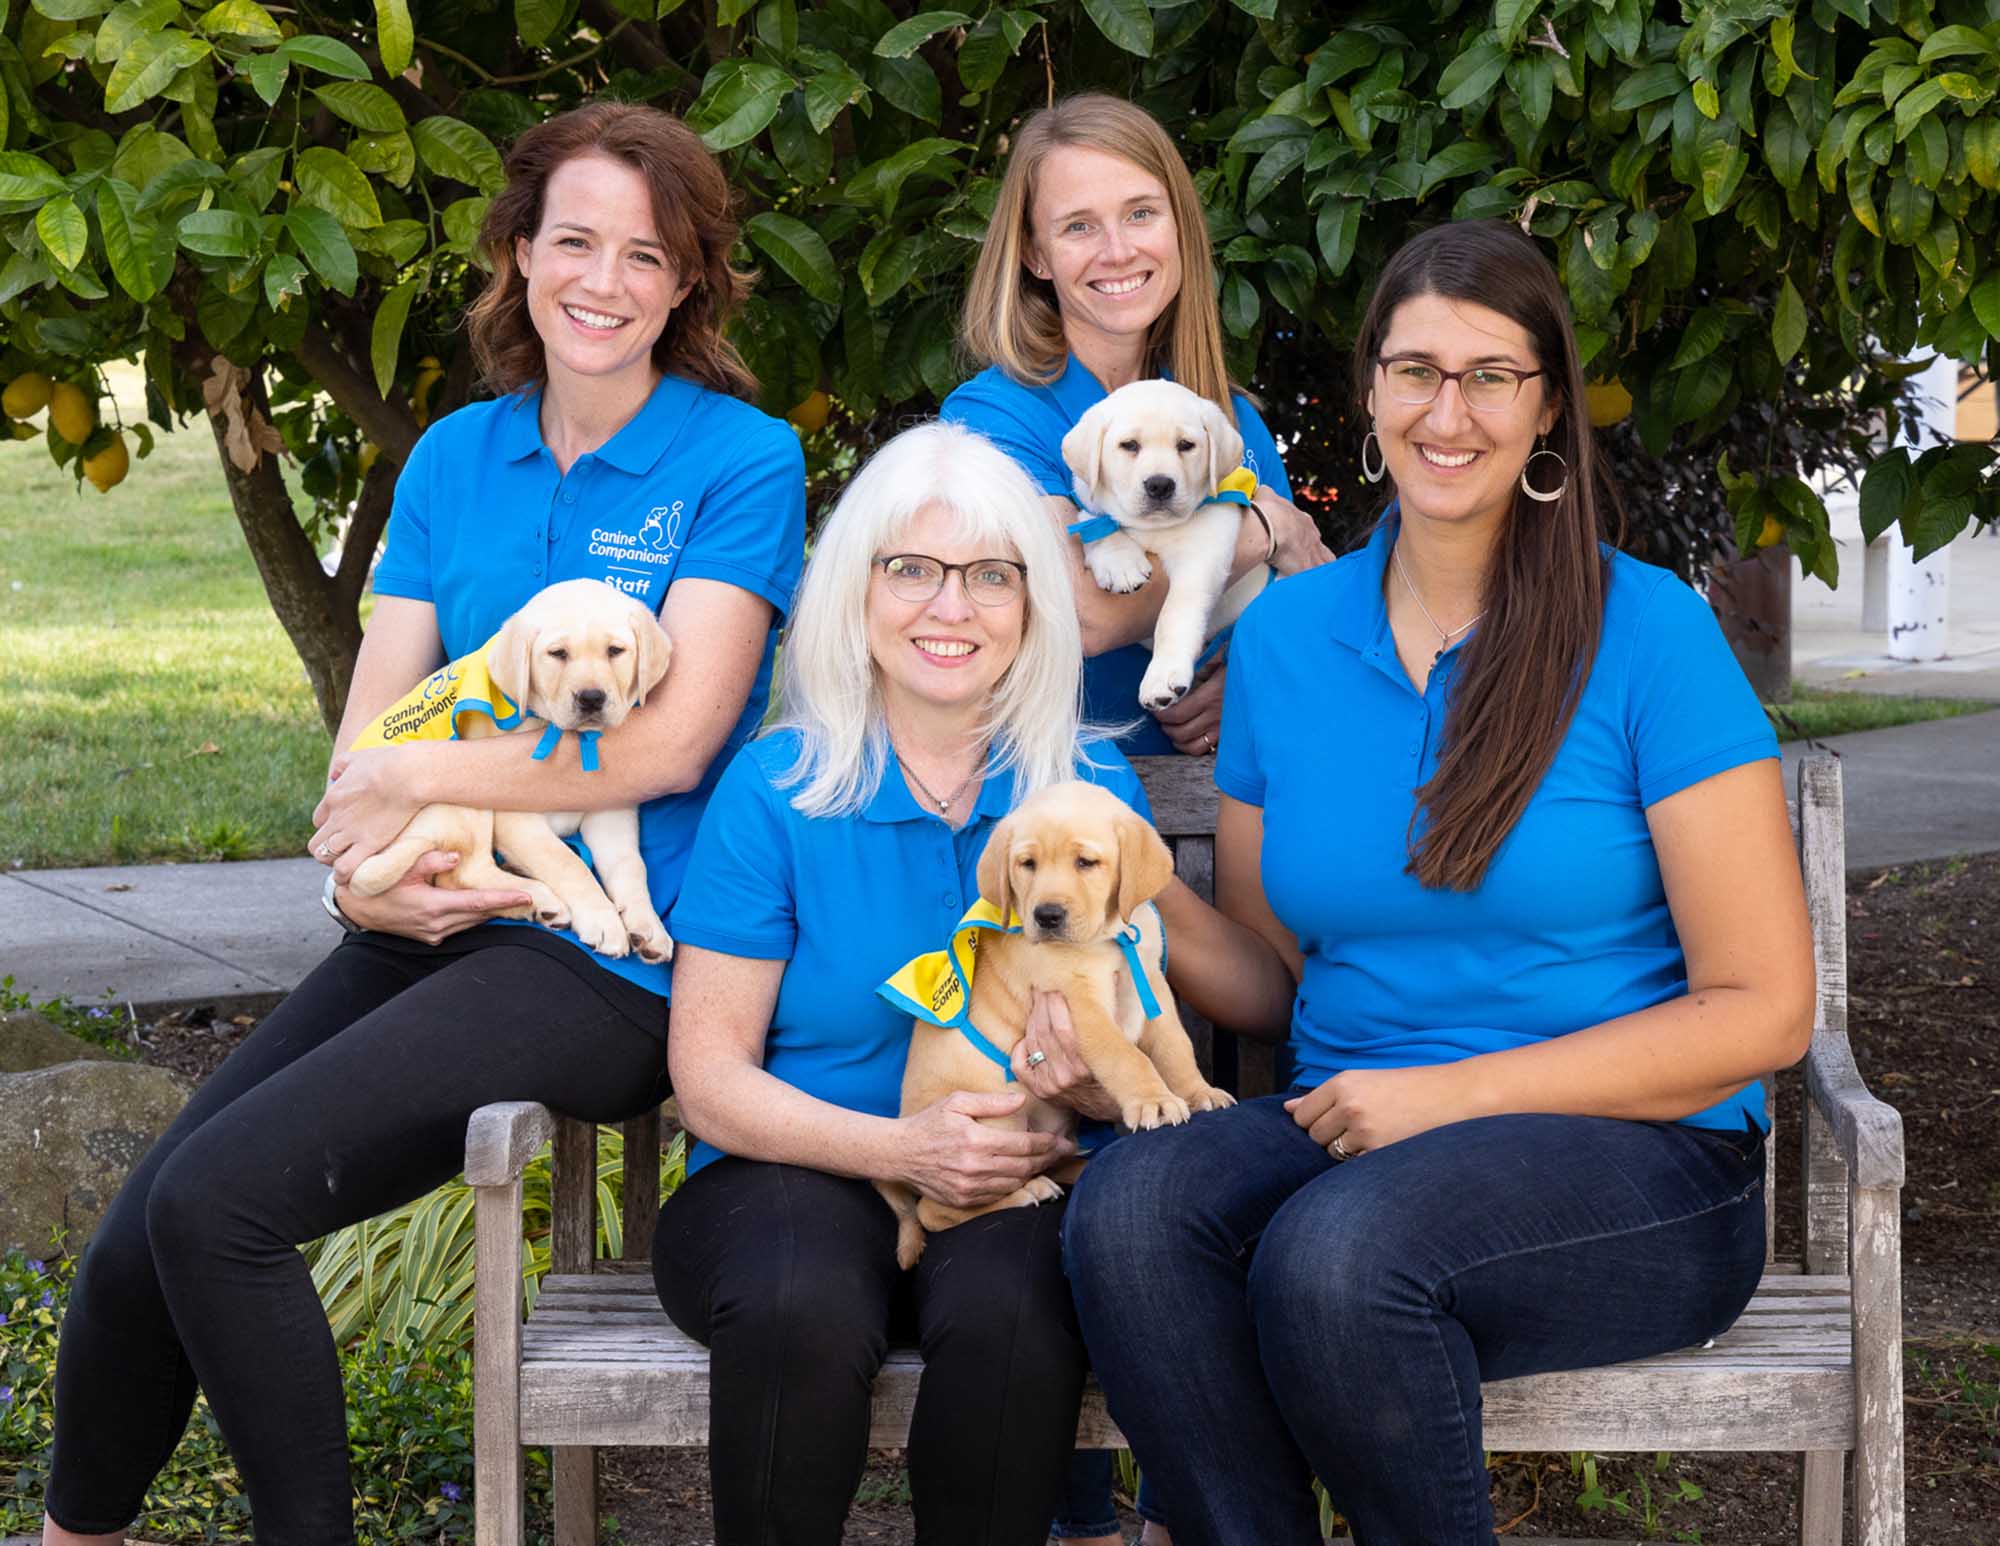 Four smiling women in canine companions polos holding puppies in yellow puppy capes